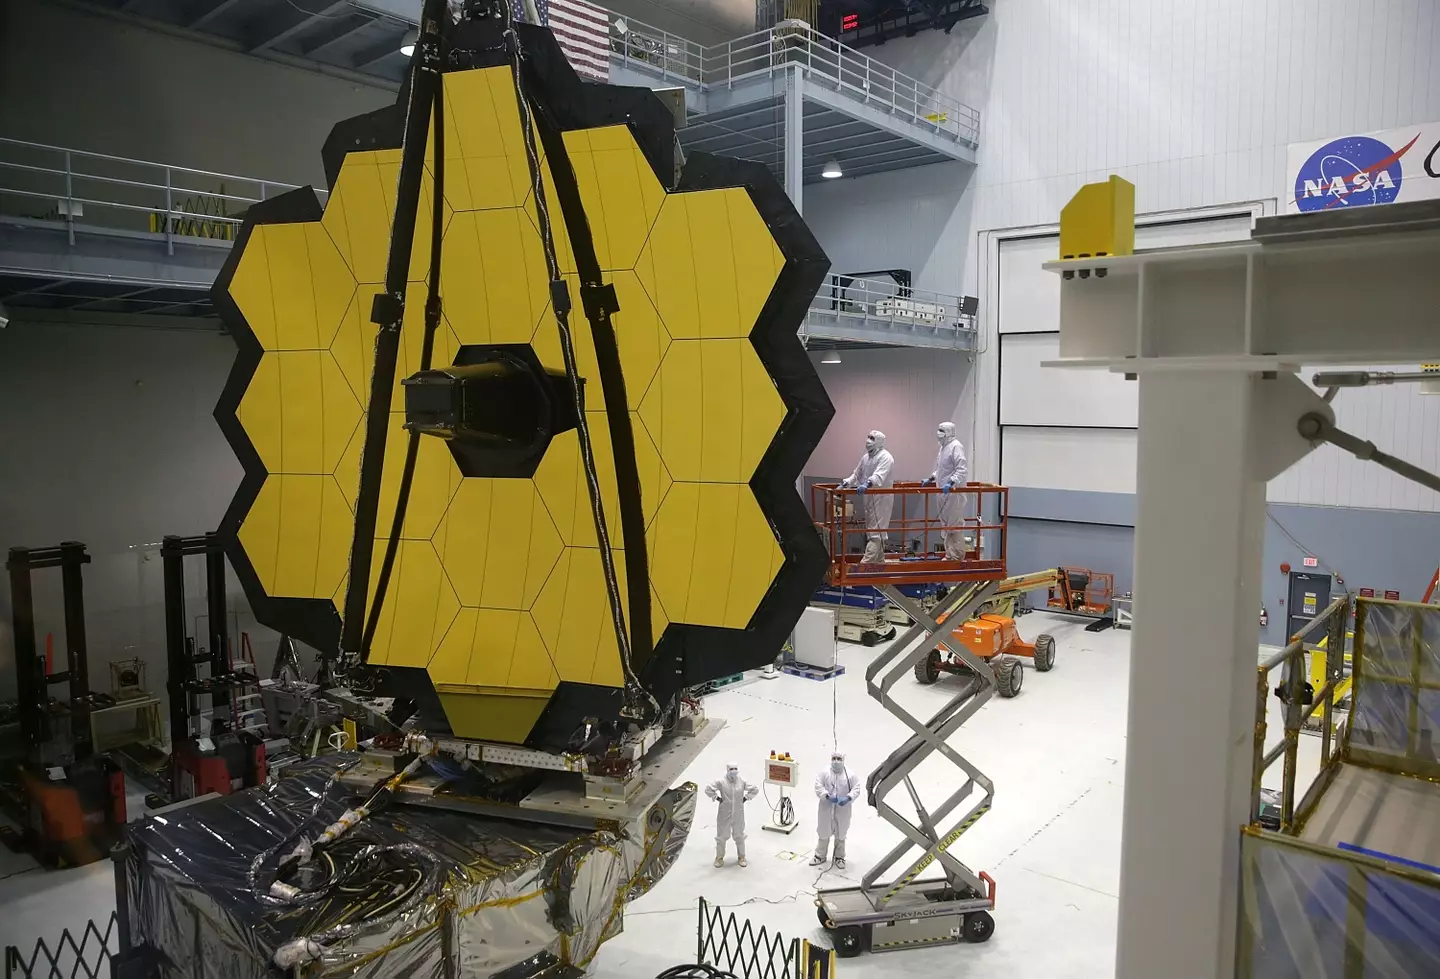 This discovery was made by the James Webb telescope, pictured here during construction.